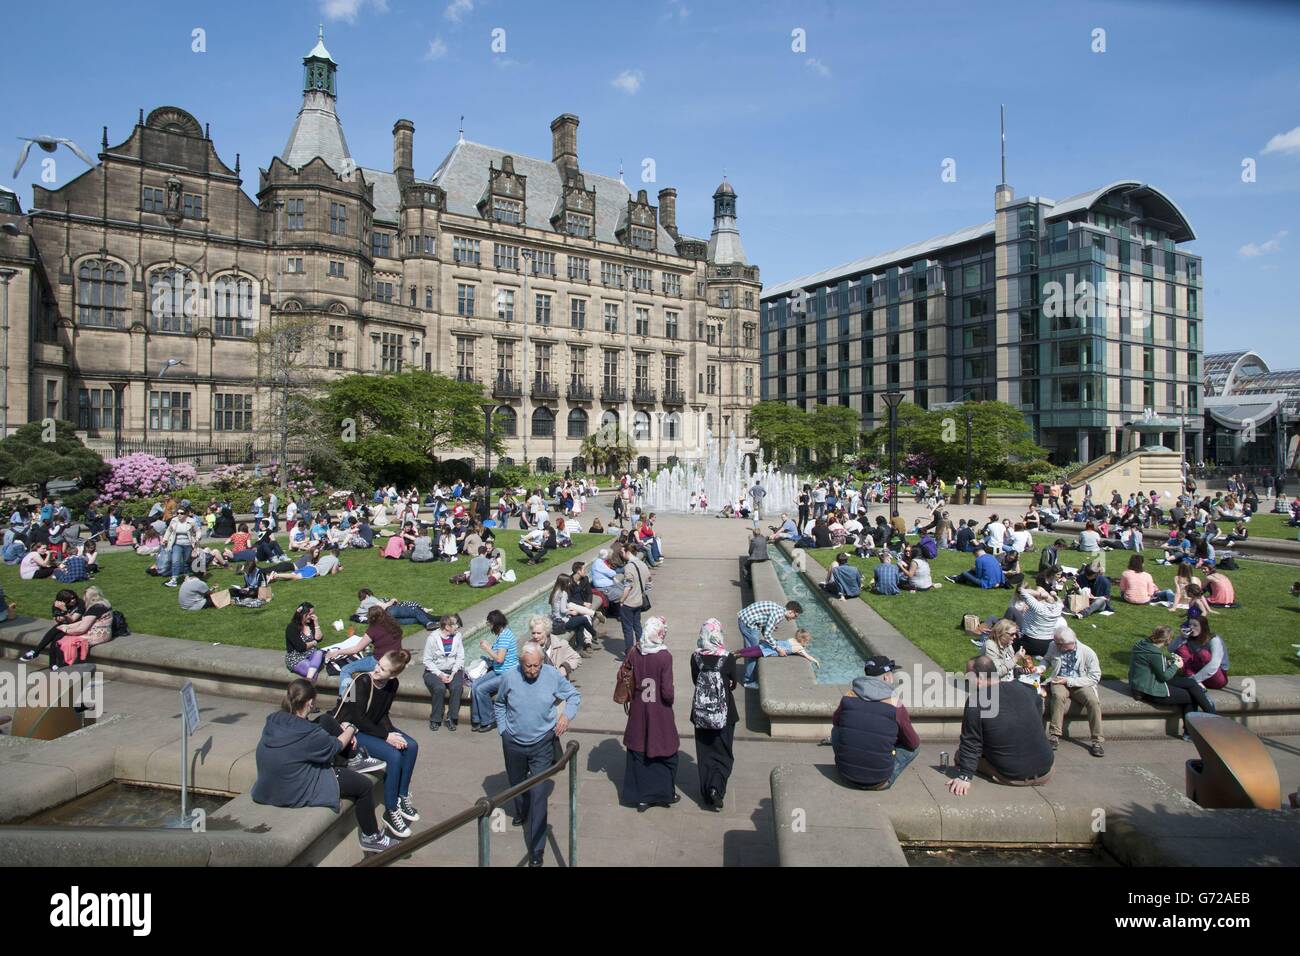 People enjoy the hot spring weather at the Peace Gardens in Sheffield city centre today. Stock Photo